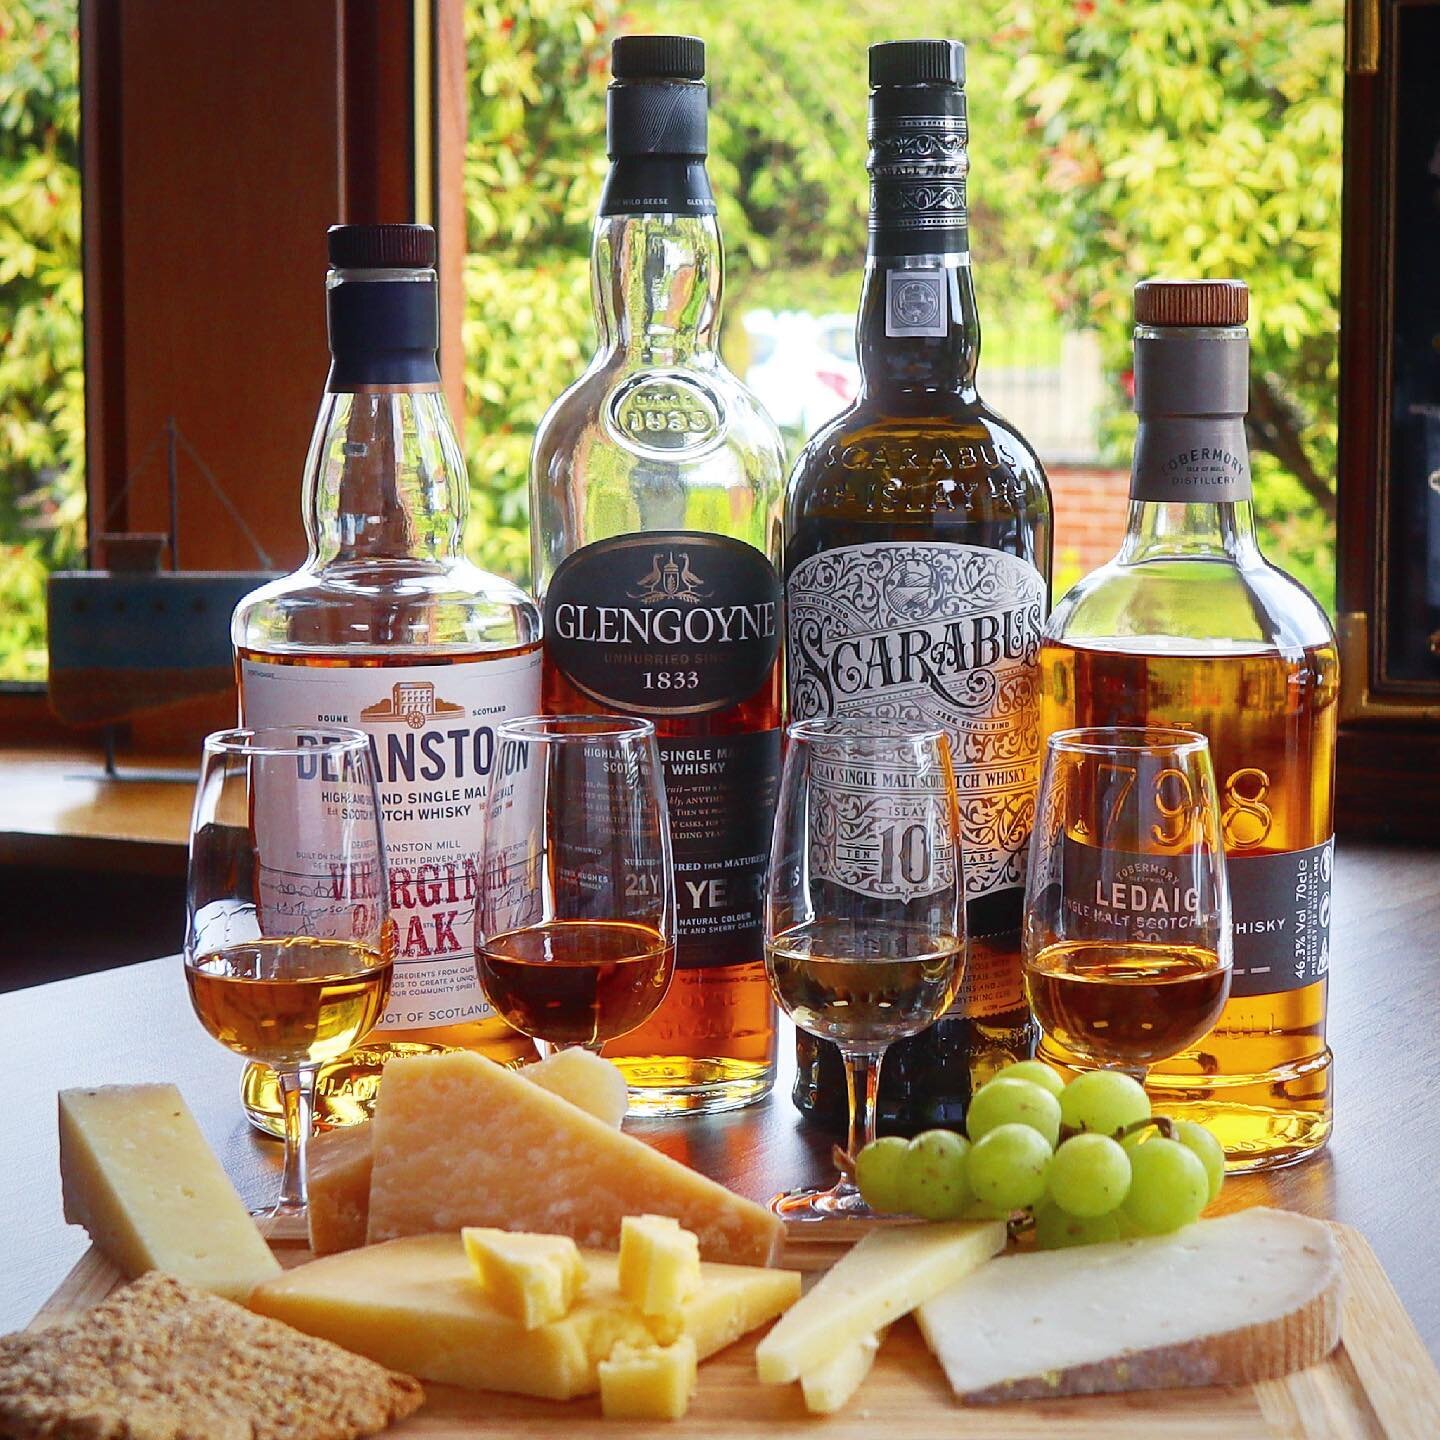 Whisky. Cheese. Whisky &amp; cheese?
Whisky constantly teaches me to never say &ldquo;I don&rsquo;t like...&rdquo; I learn I don&rsquo;t actually know everything I like, yet. 
Once I didn&rsquo;t fancy mixing whisky with any food, preferring instead 